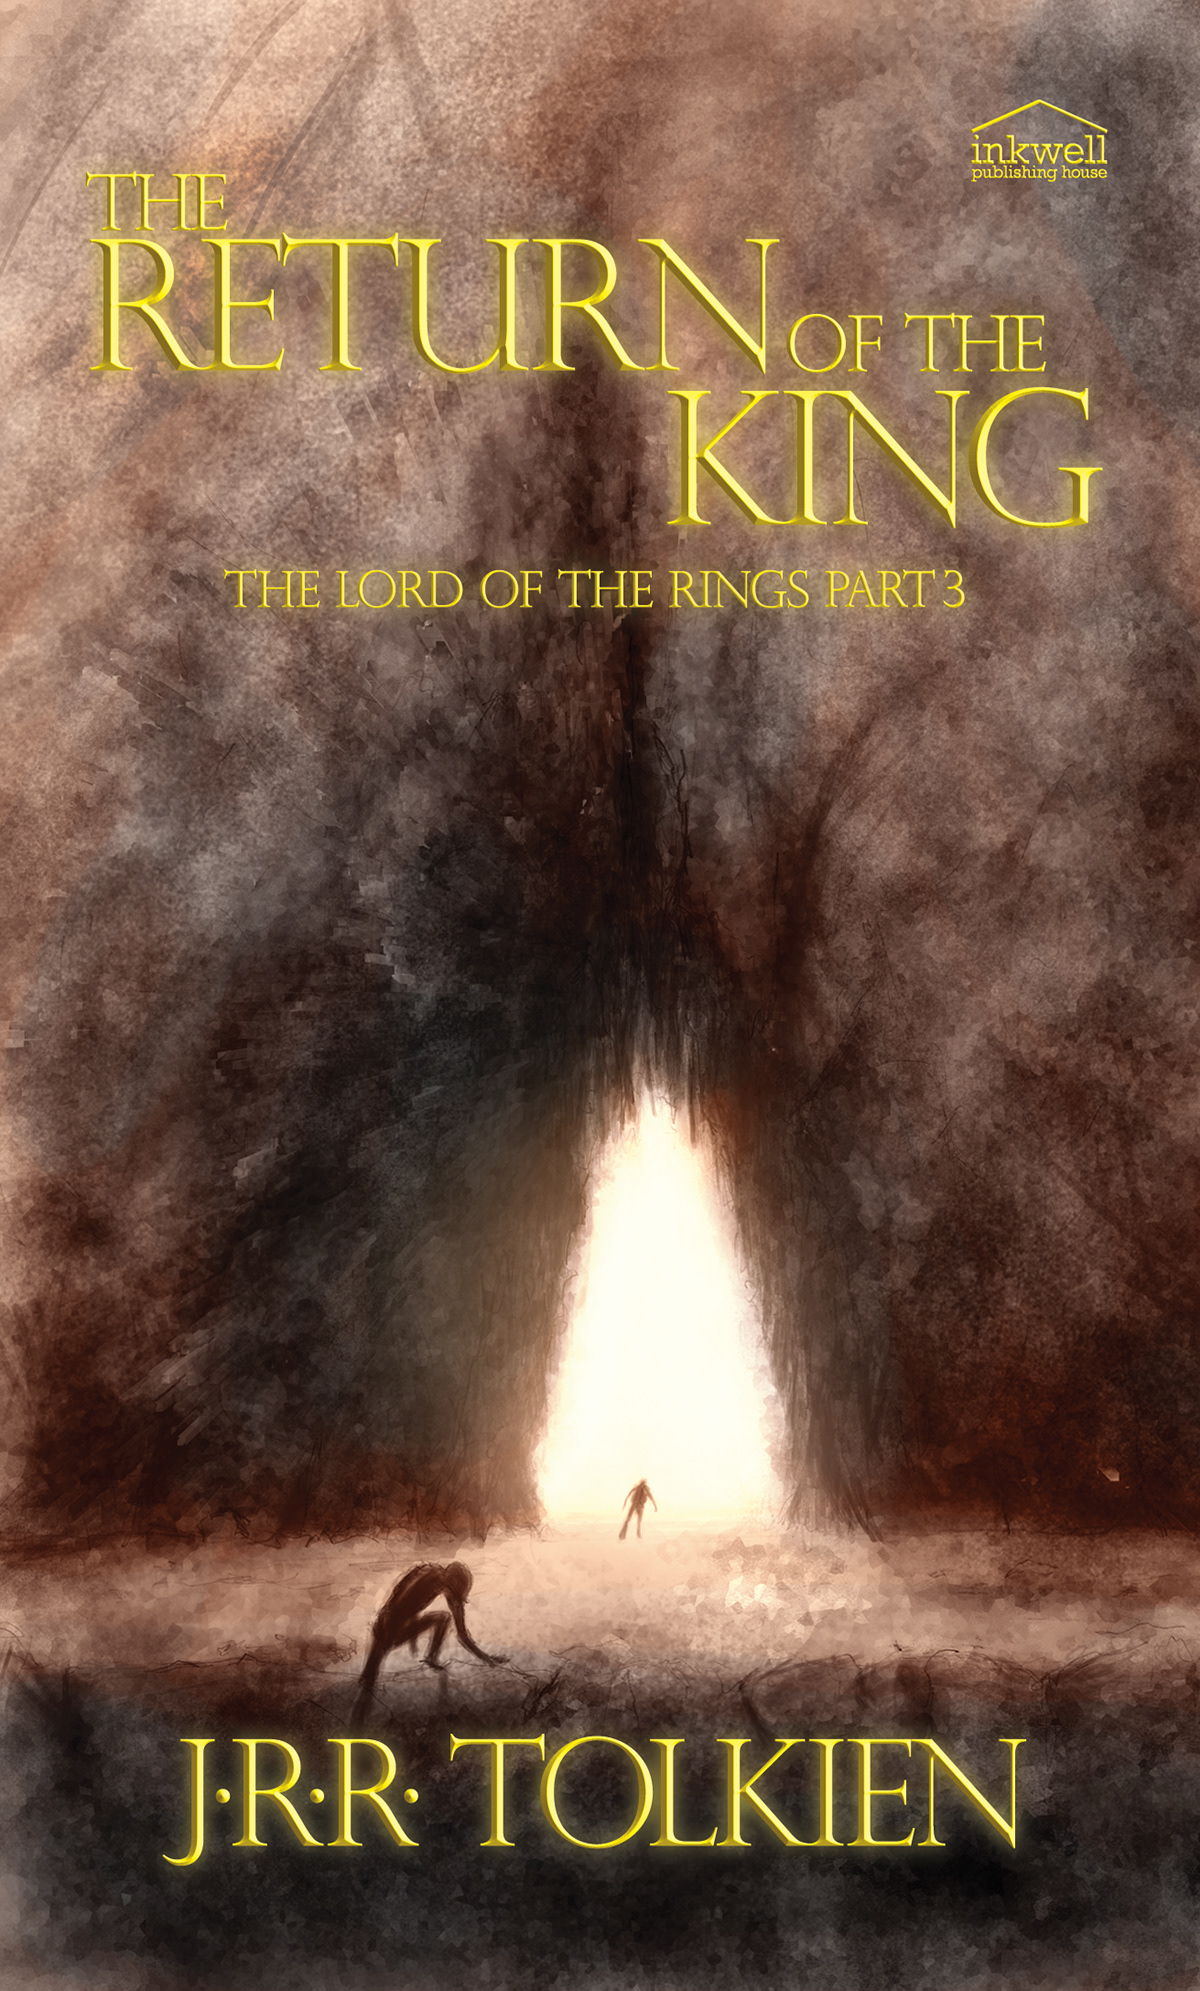 The Lord Of The Rings Book Covers on Behance